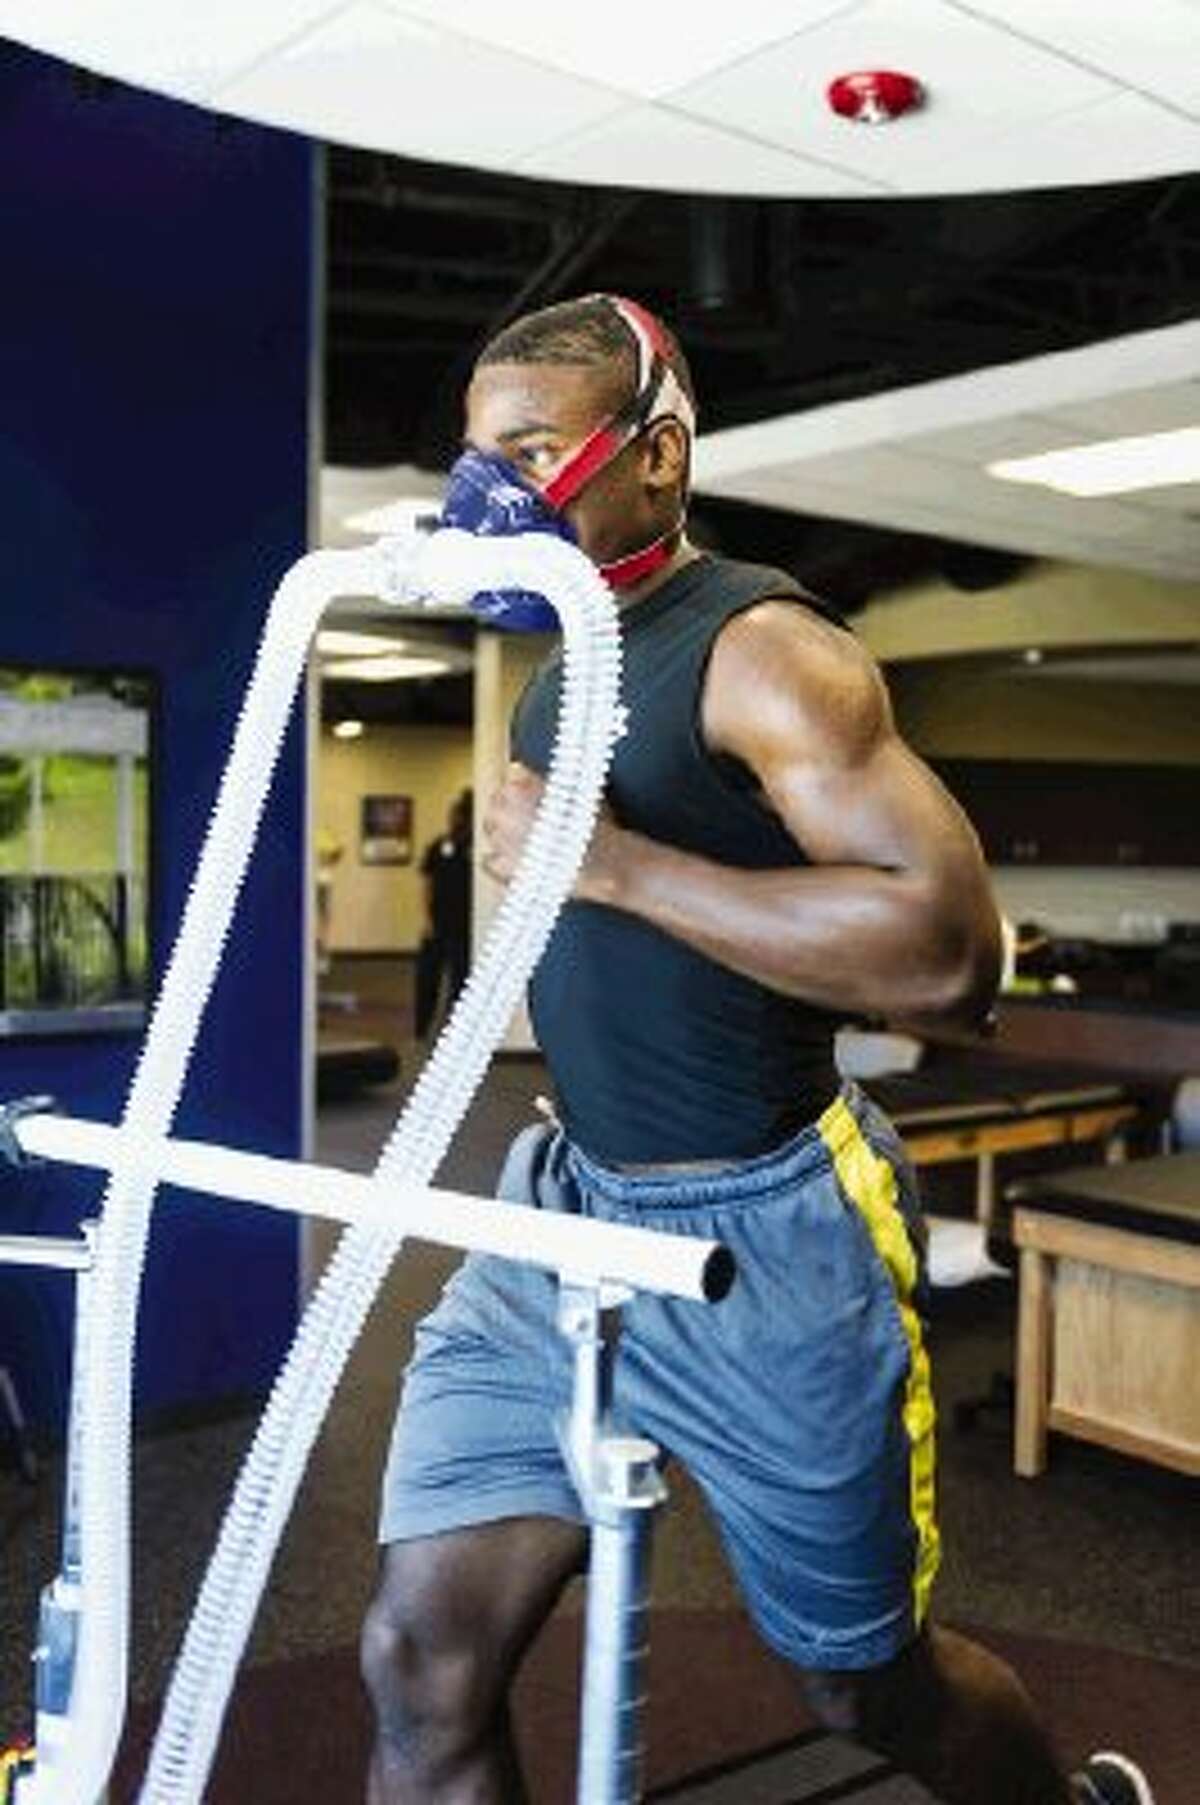 Patrick Carr, a football player with The Woodlands High School, is shown undergoing a VO2 Max Test at Memorial Hermann Ironman Sports Medicine Institute in The Woodlands. A VO2 Max test measures how efficiently an athlete’s body uses oxygen during maximal or exhaustive exercise.